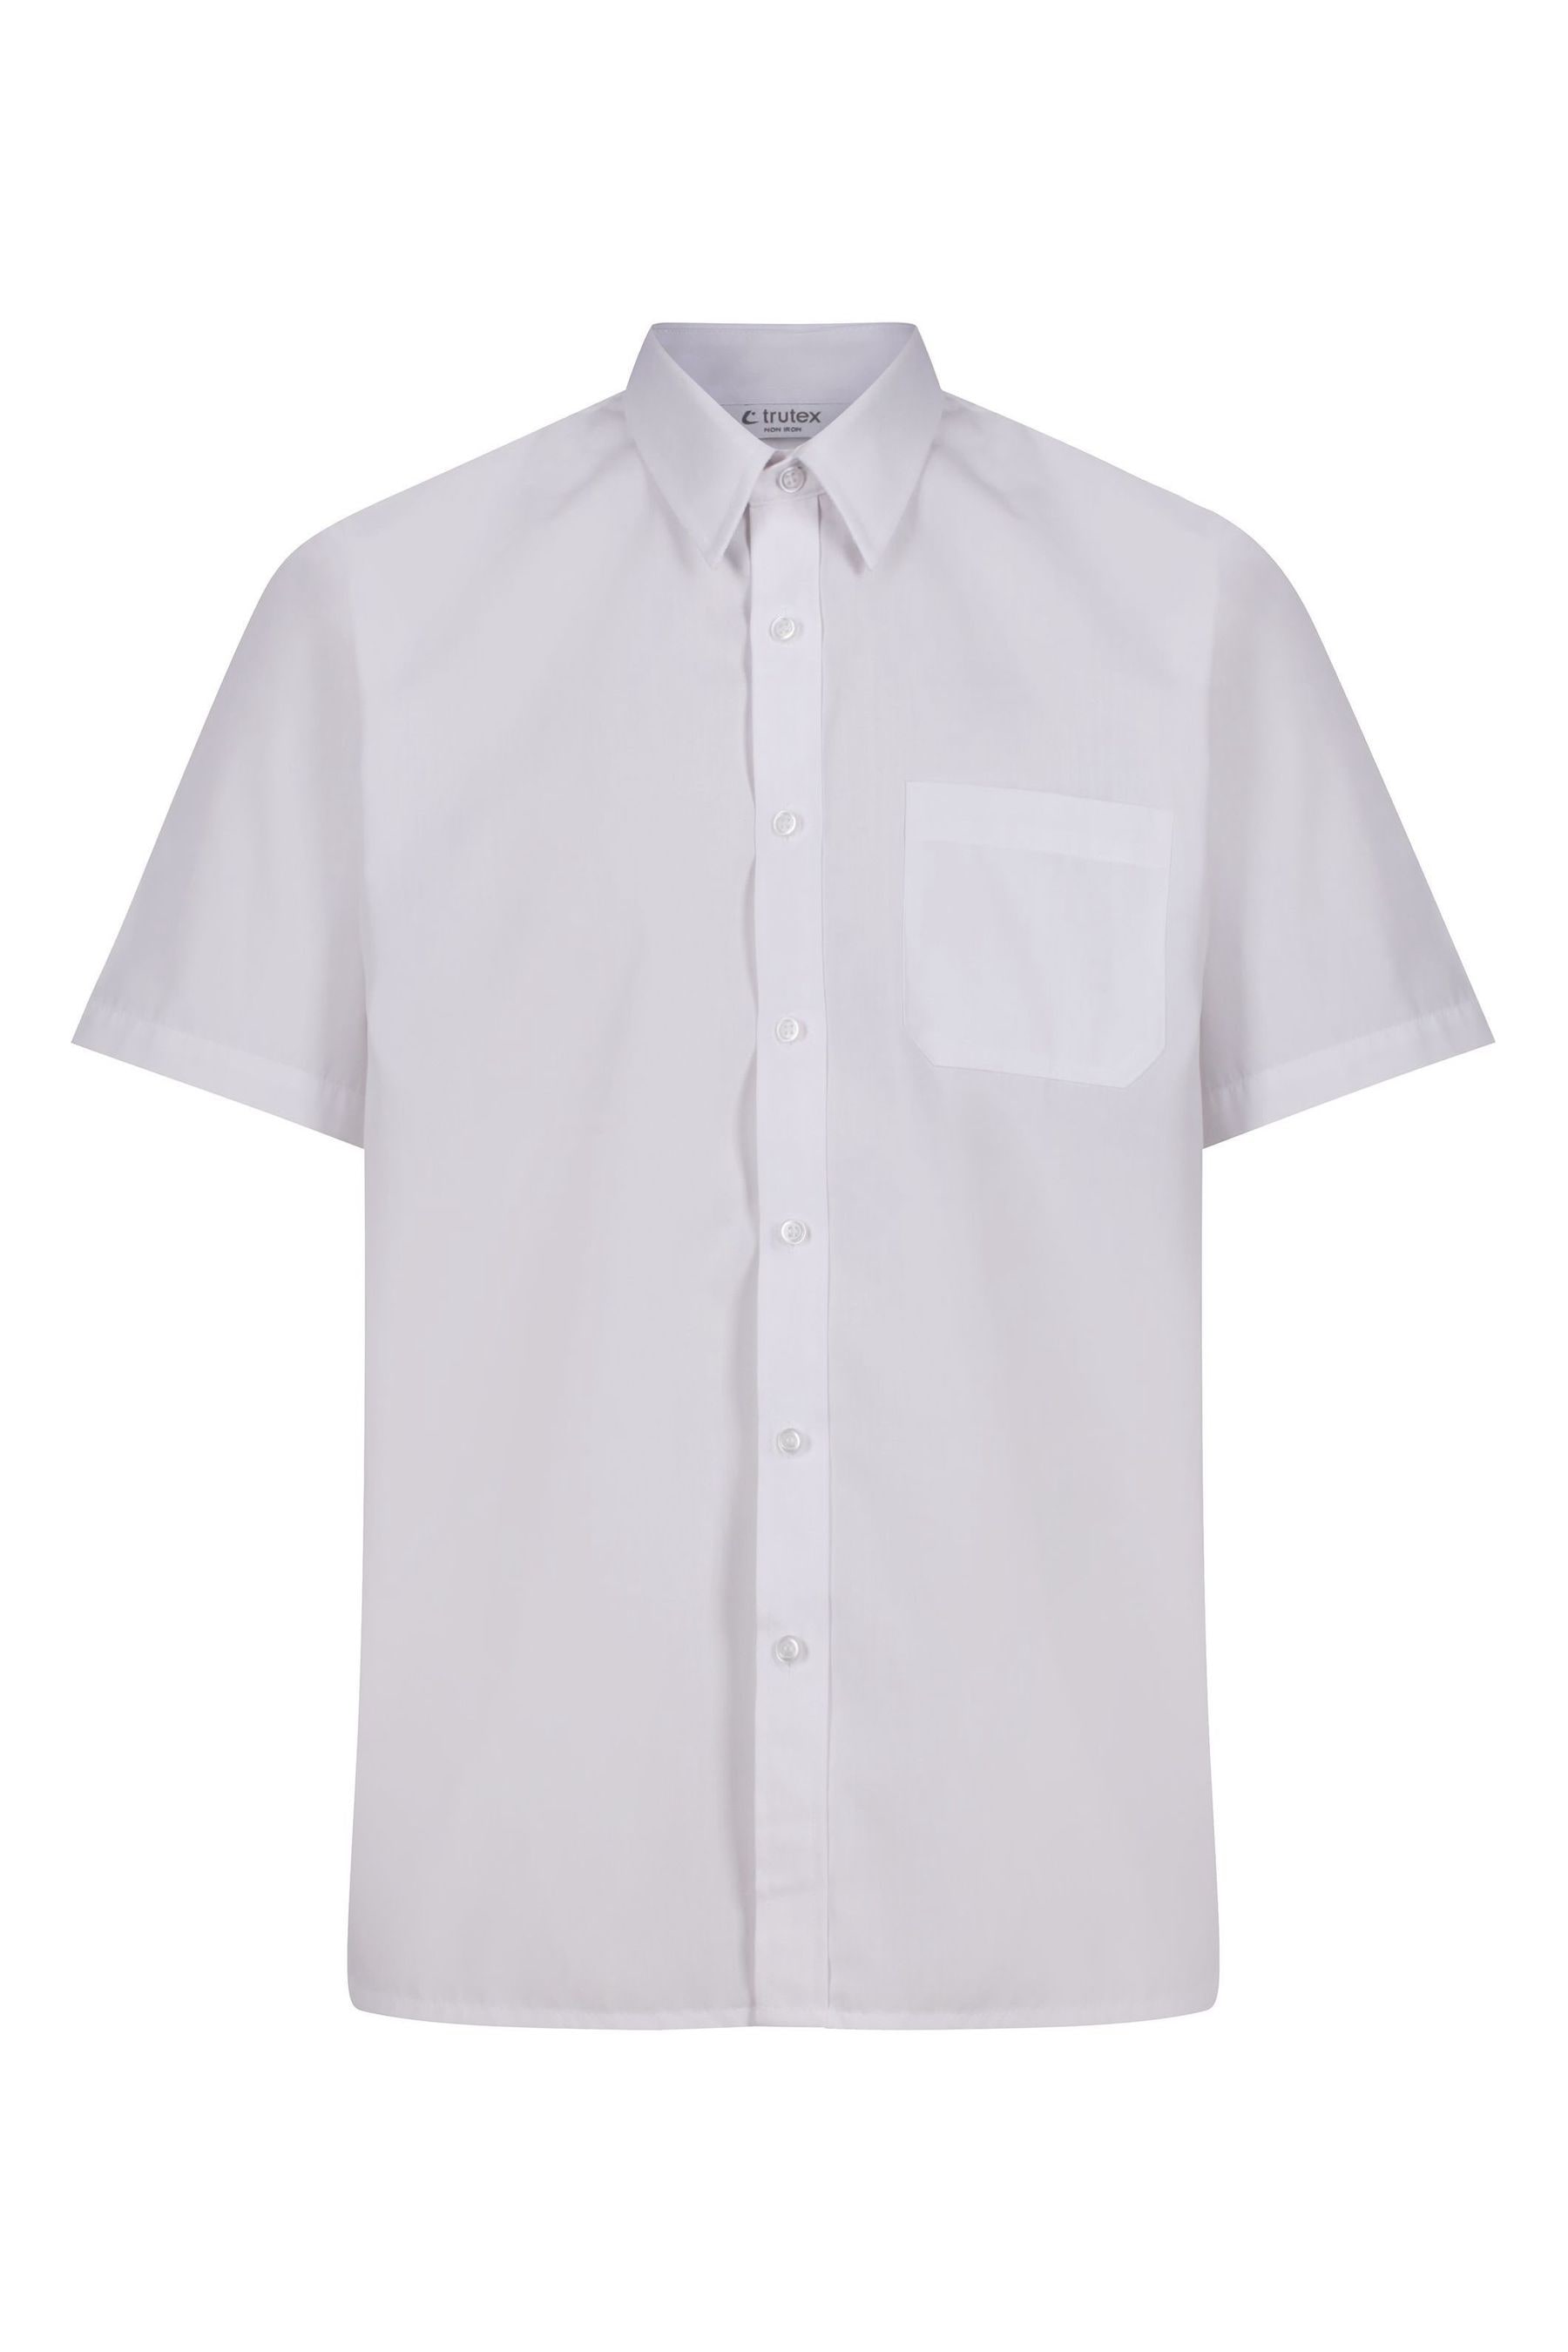 Buy Trutex Boys White Non Iron Short Sleeve School Shirts 2 Pack from ...